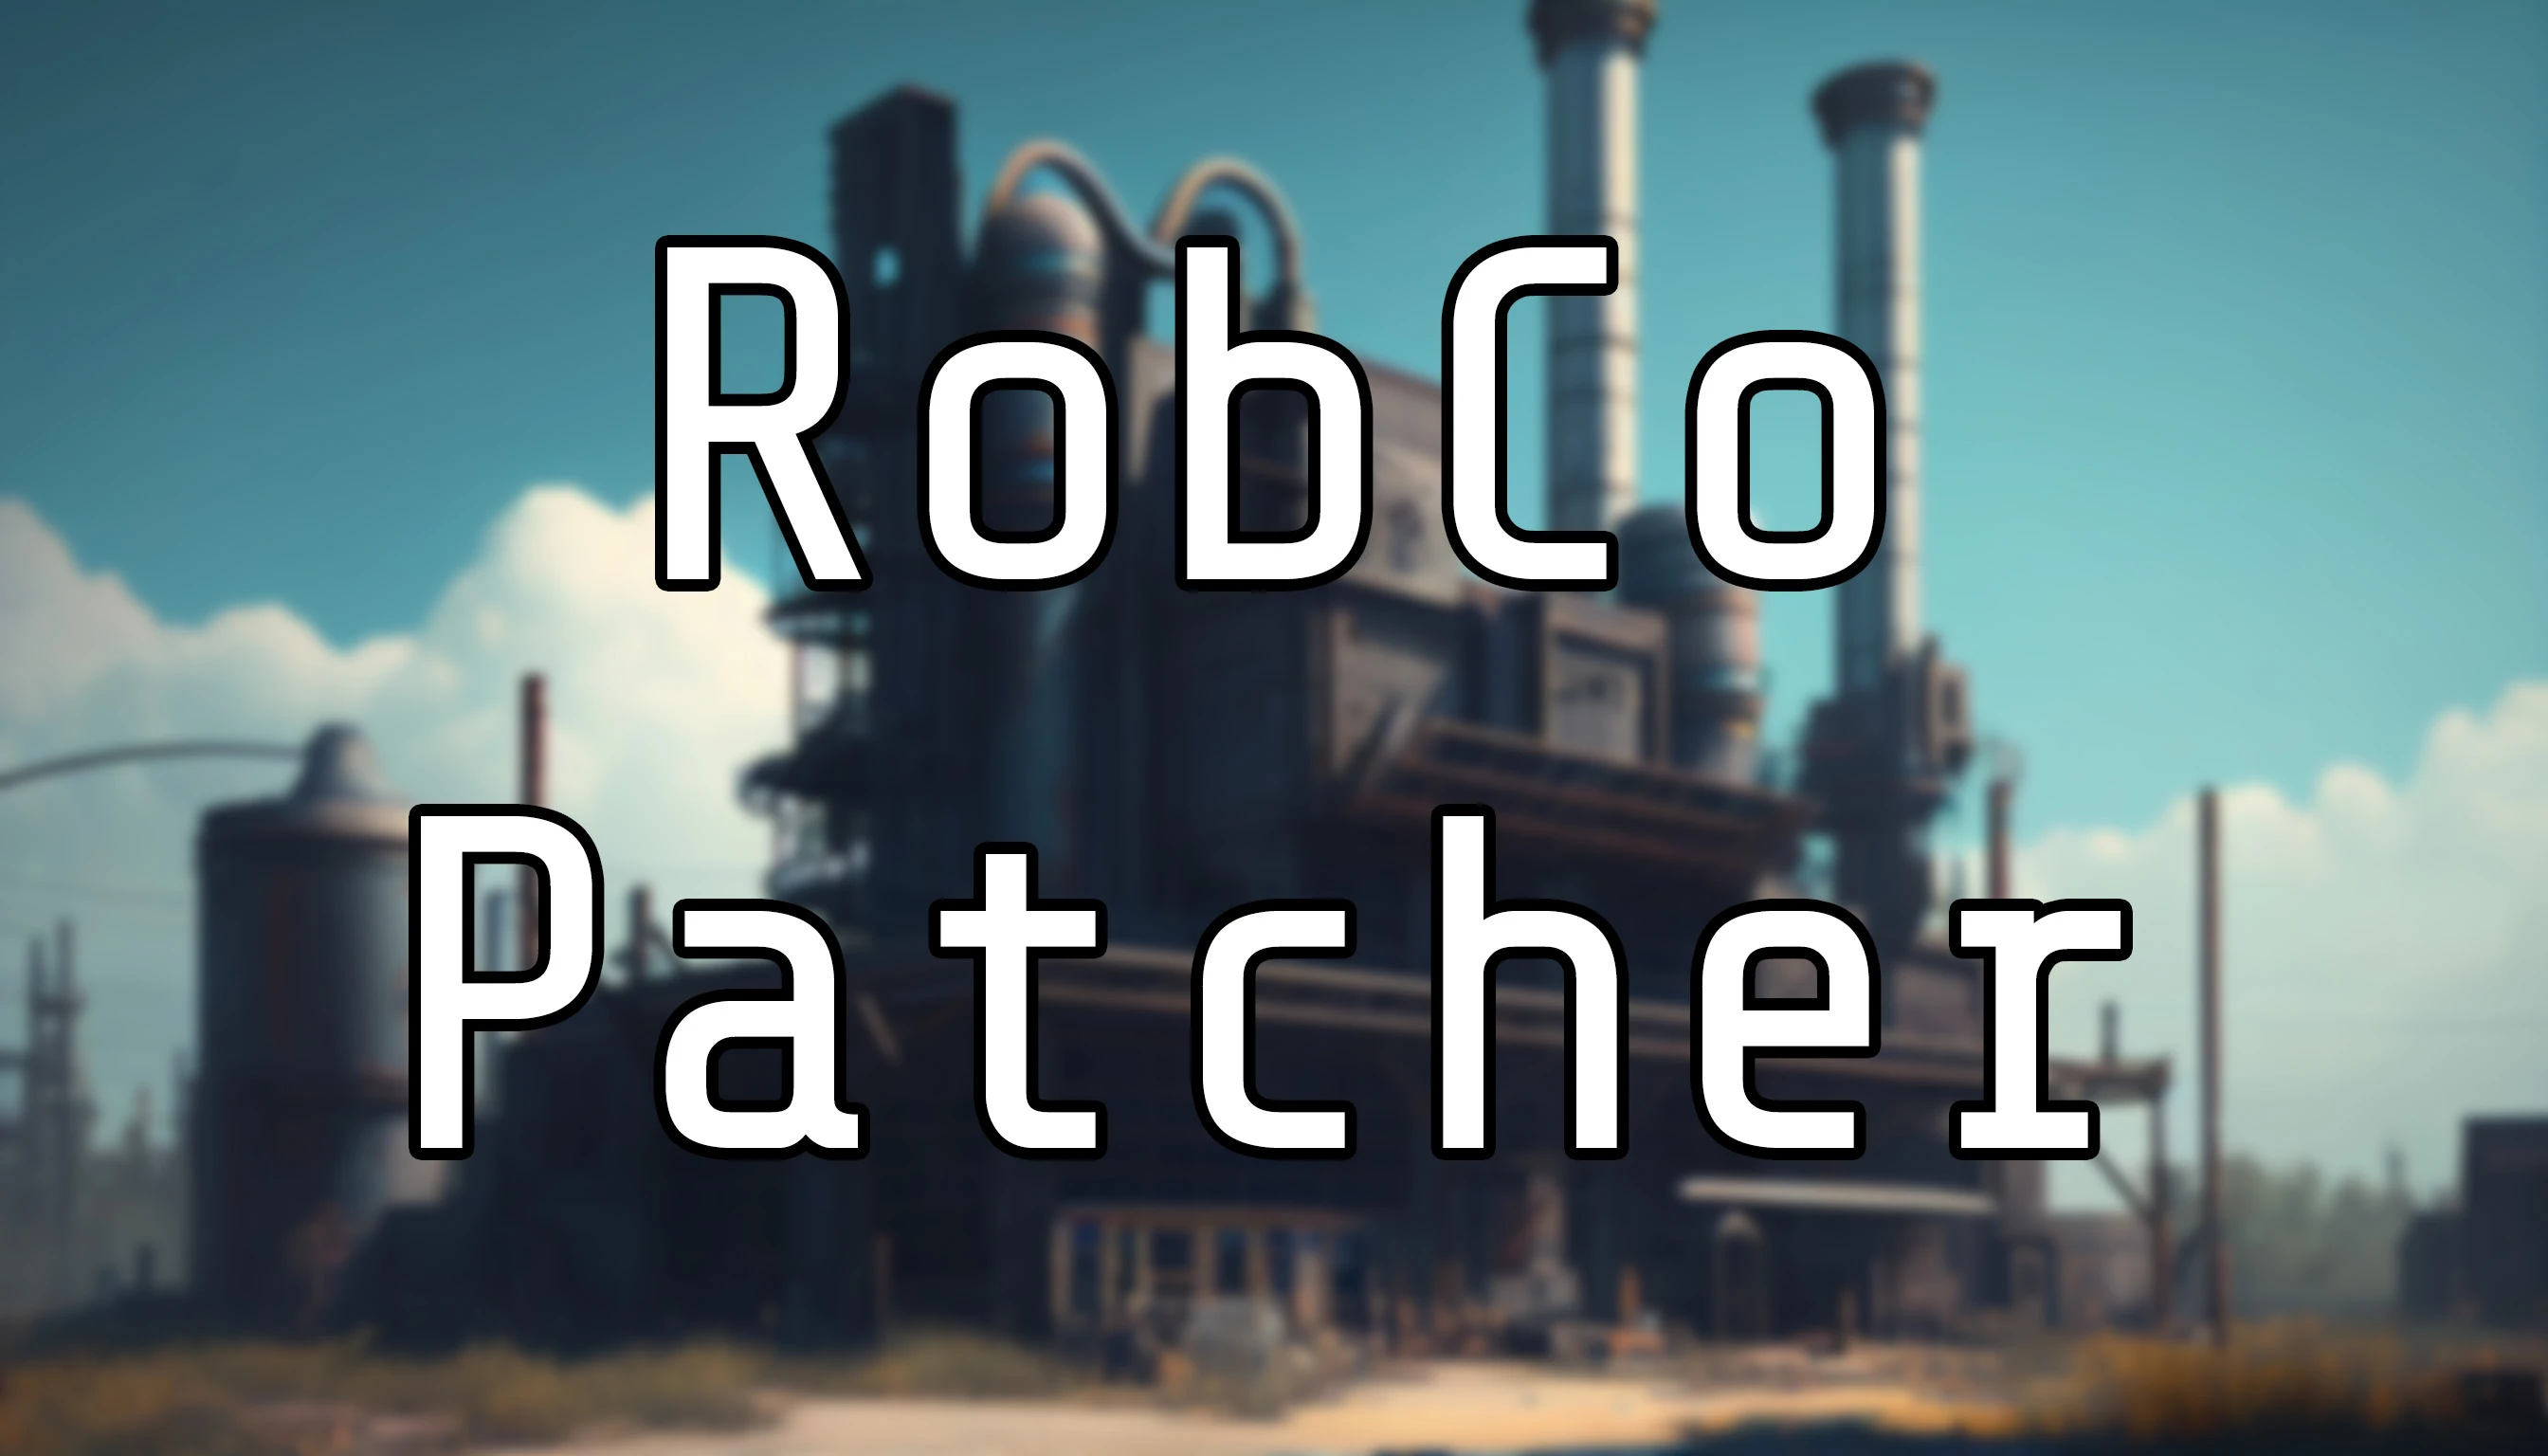 RobCo Patcher